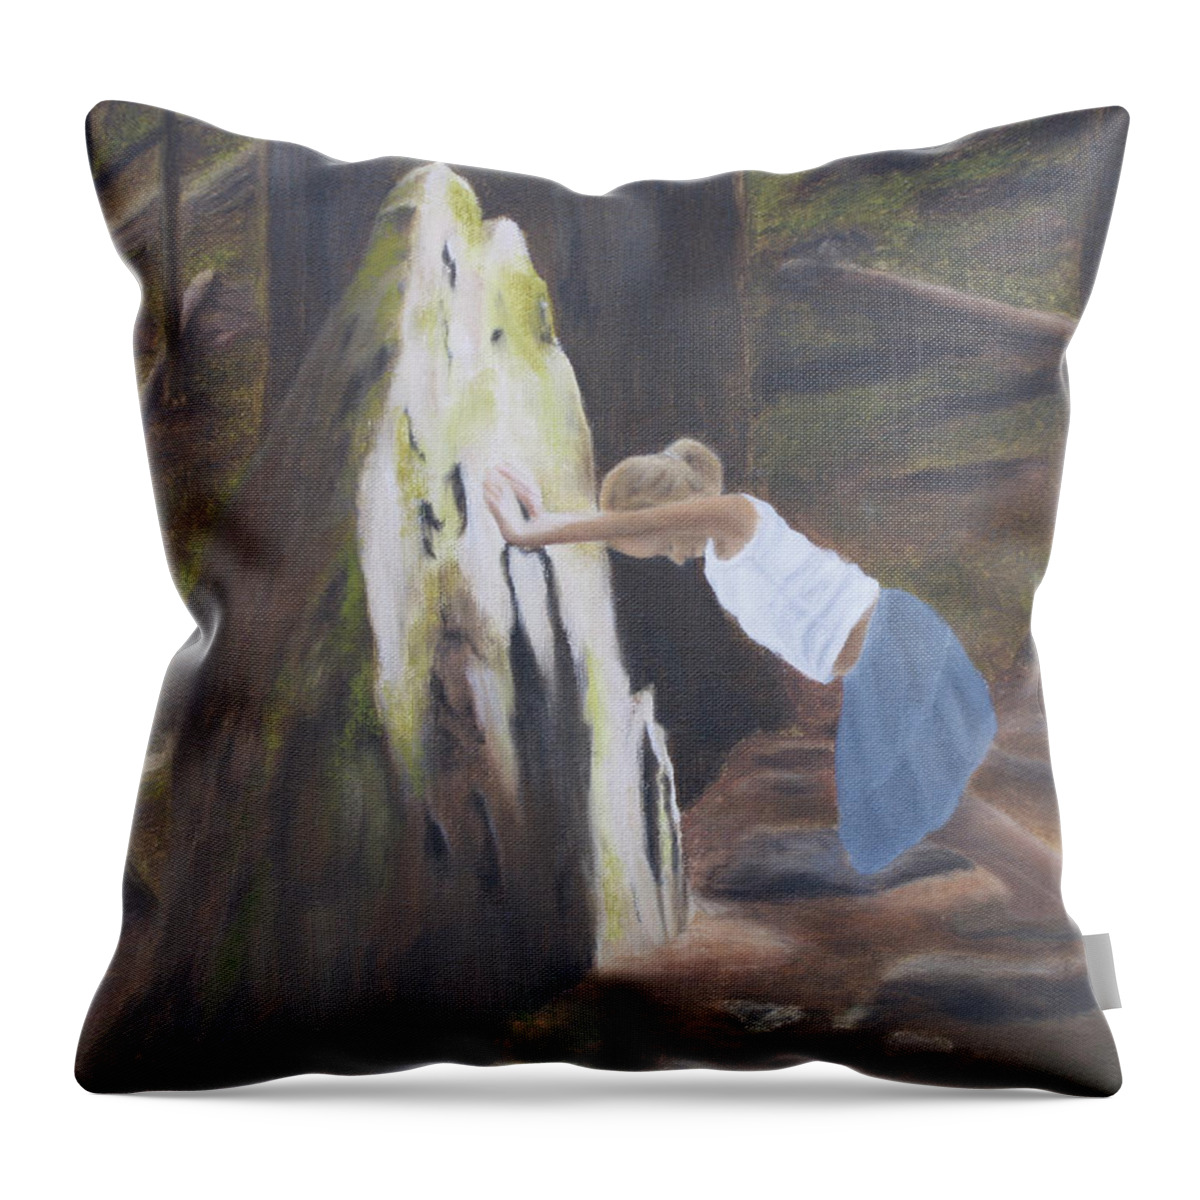 Childhood Throw Pillow featuring the painting Light Weight by Marg Wolf